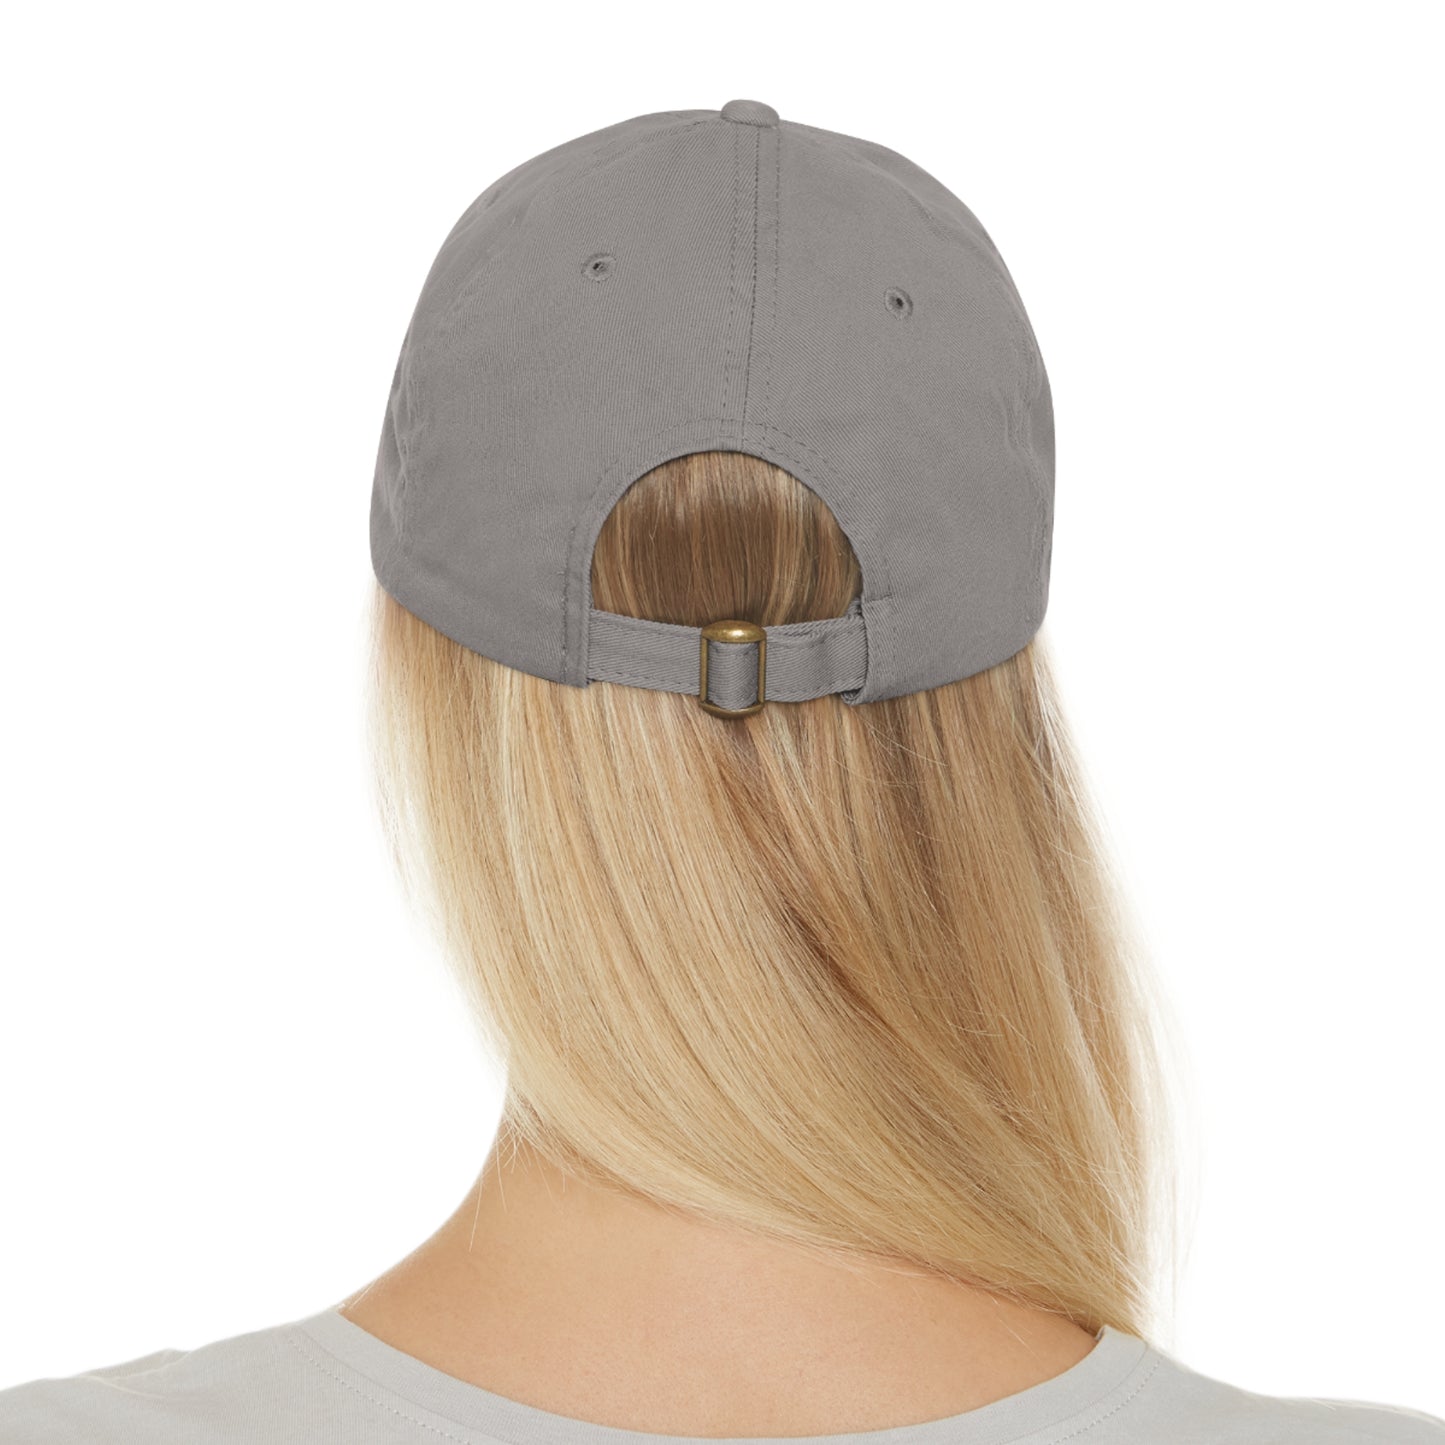 Teevolution Hat with Leather Patch